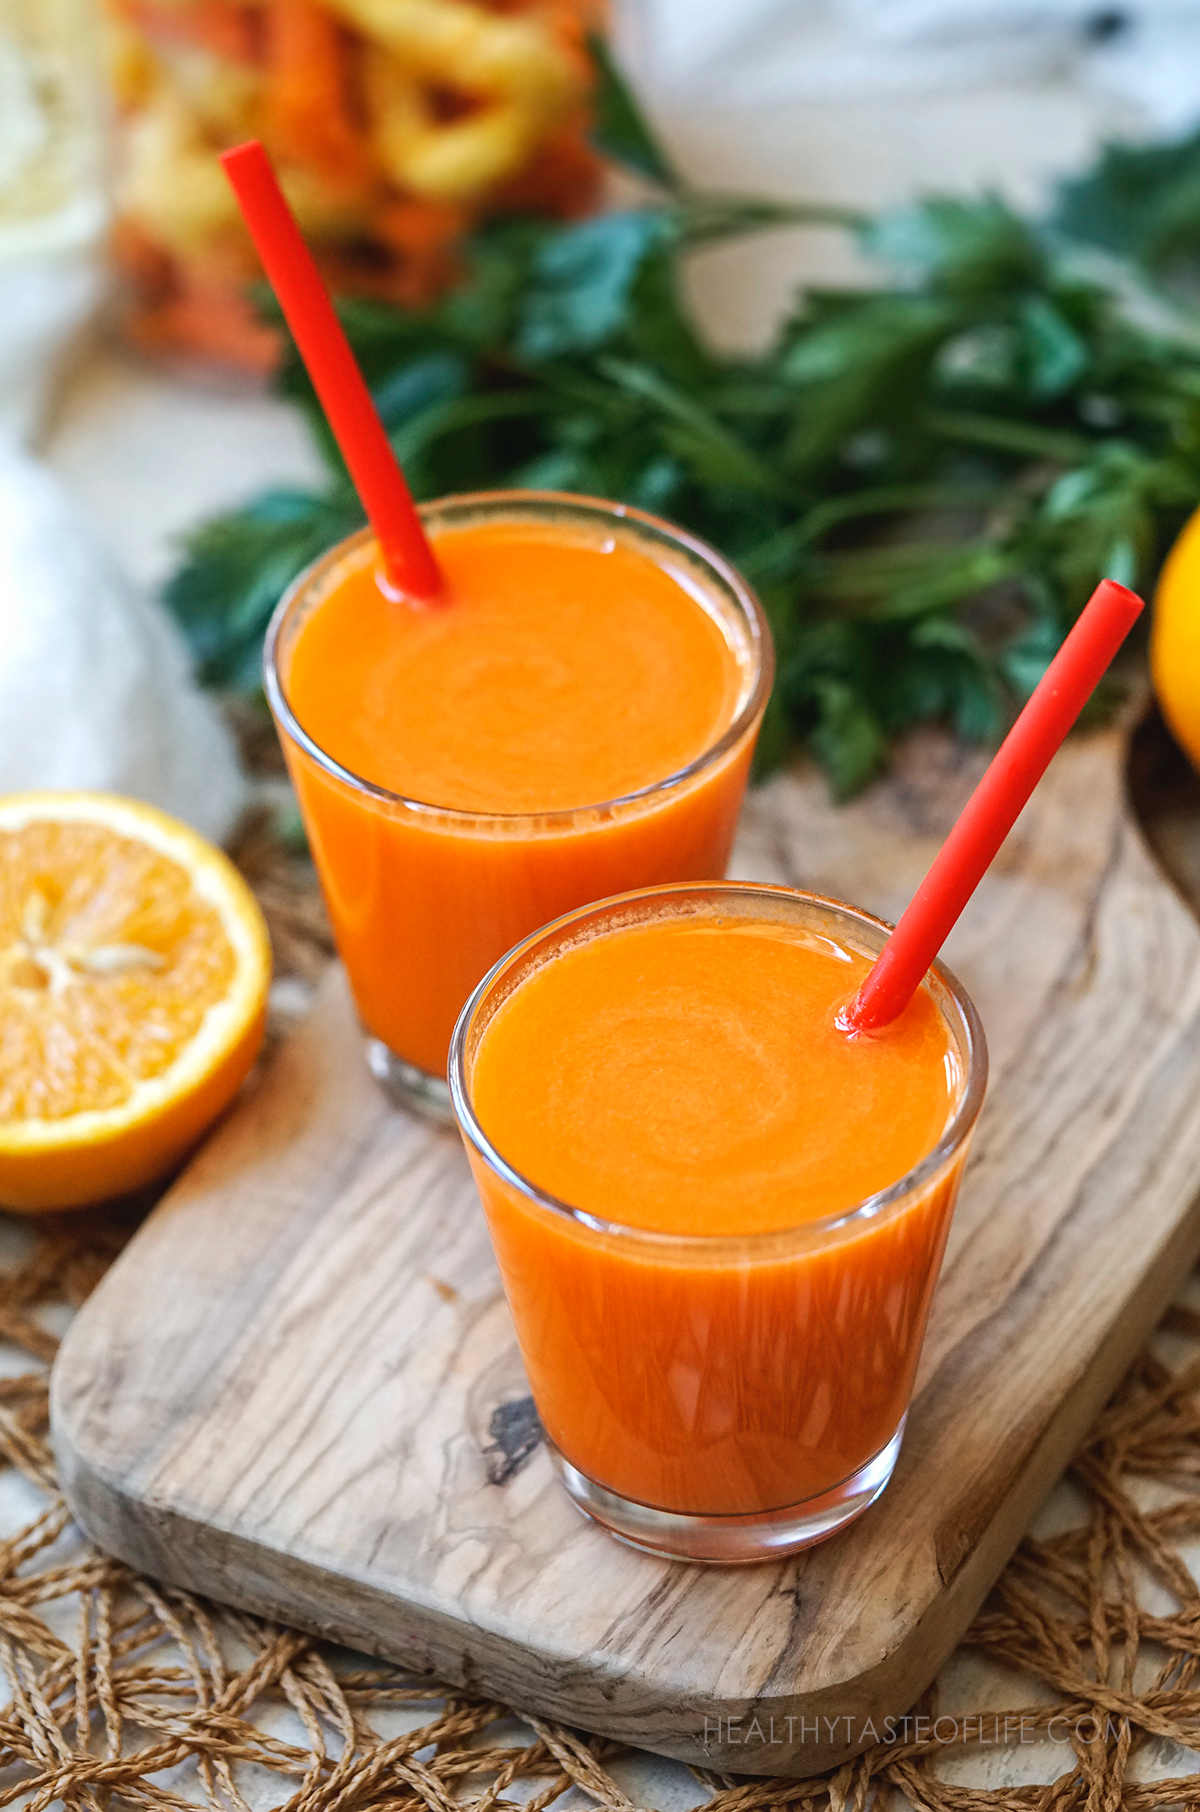 Carrot orange and ginger juice.